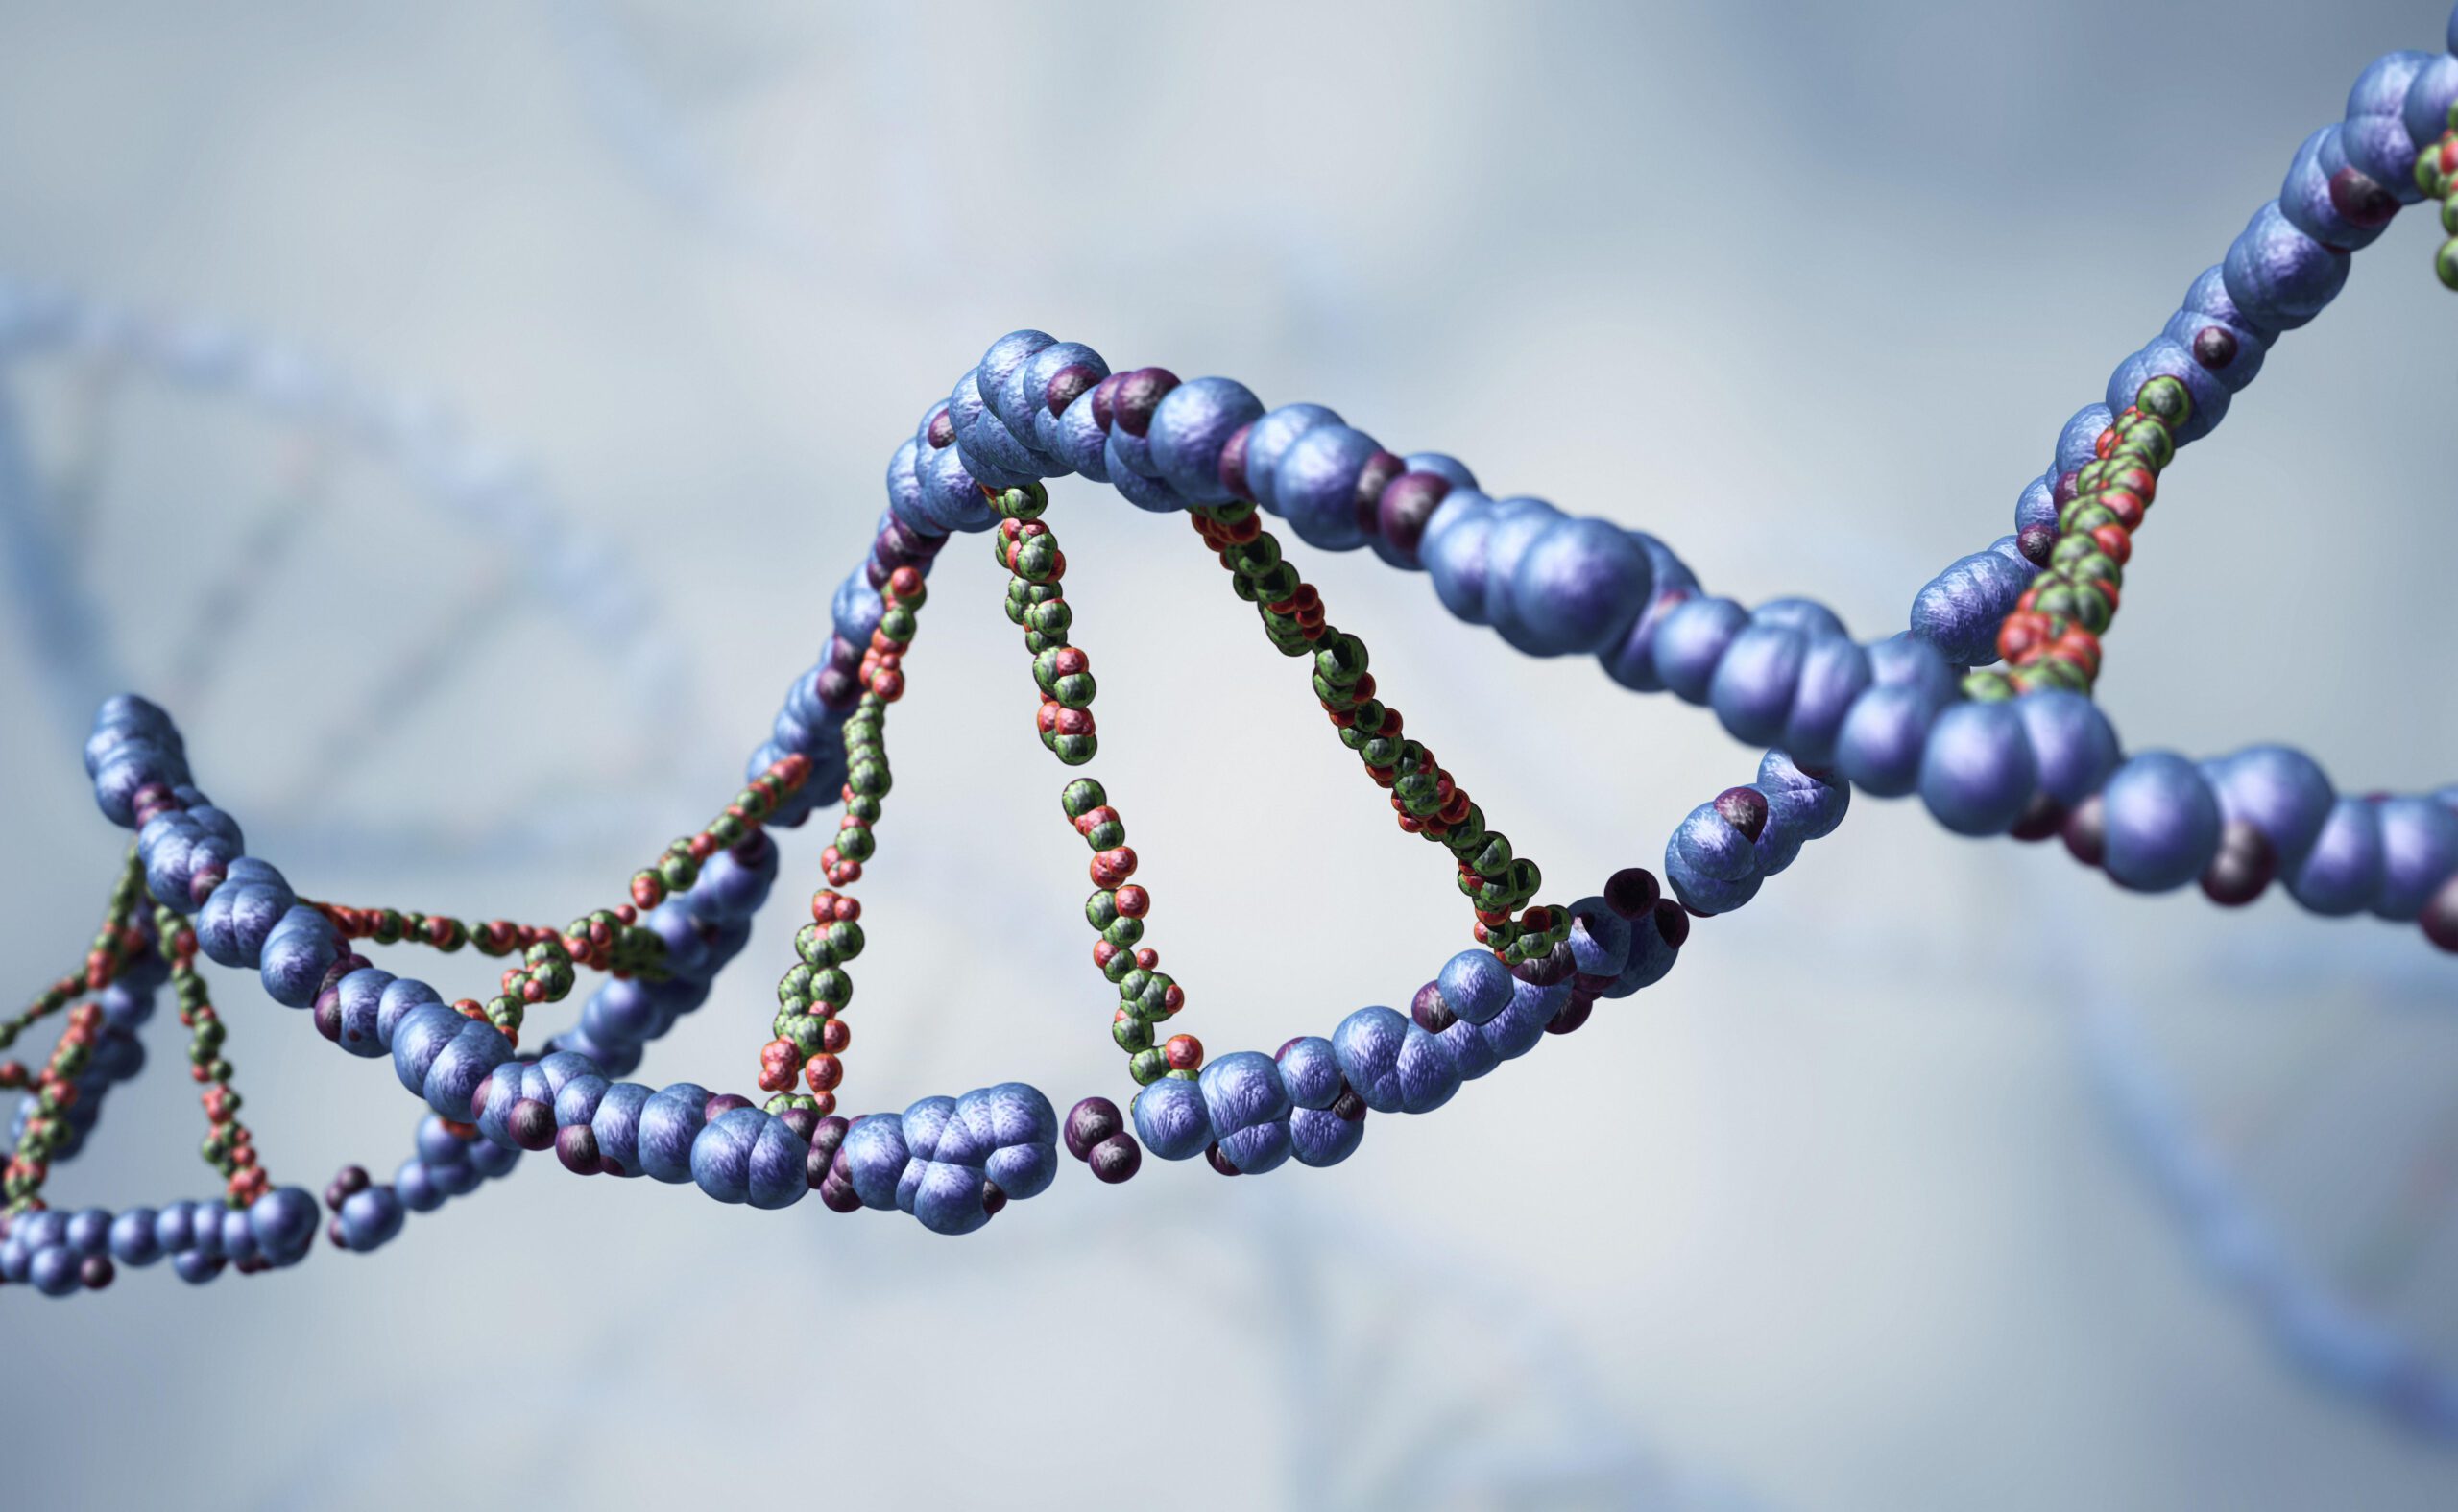 DNA Sequencing Equipment Vulnerability Adds New Twist to Medical Device Cyber Threats – Source: www.darkreading.com